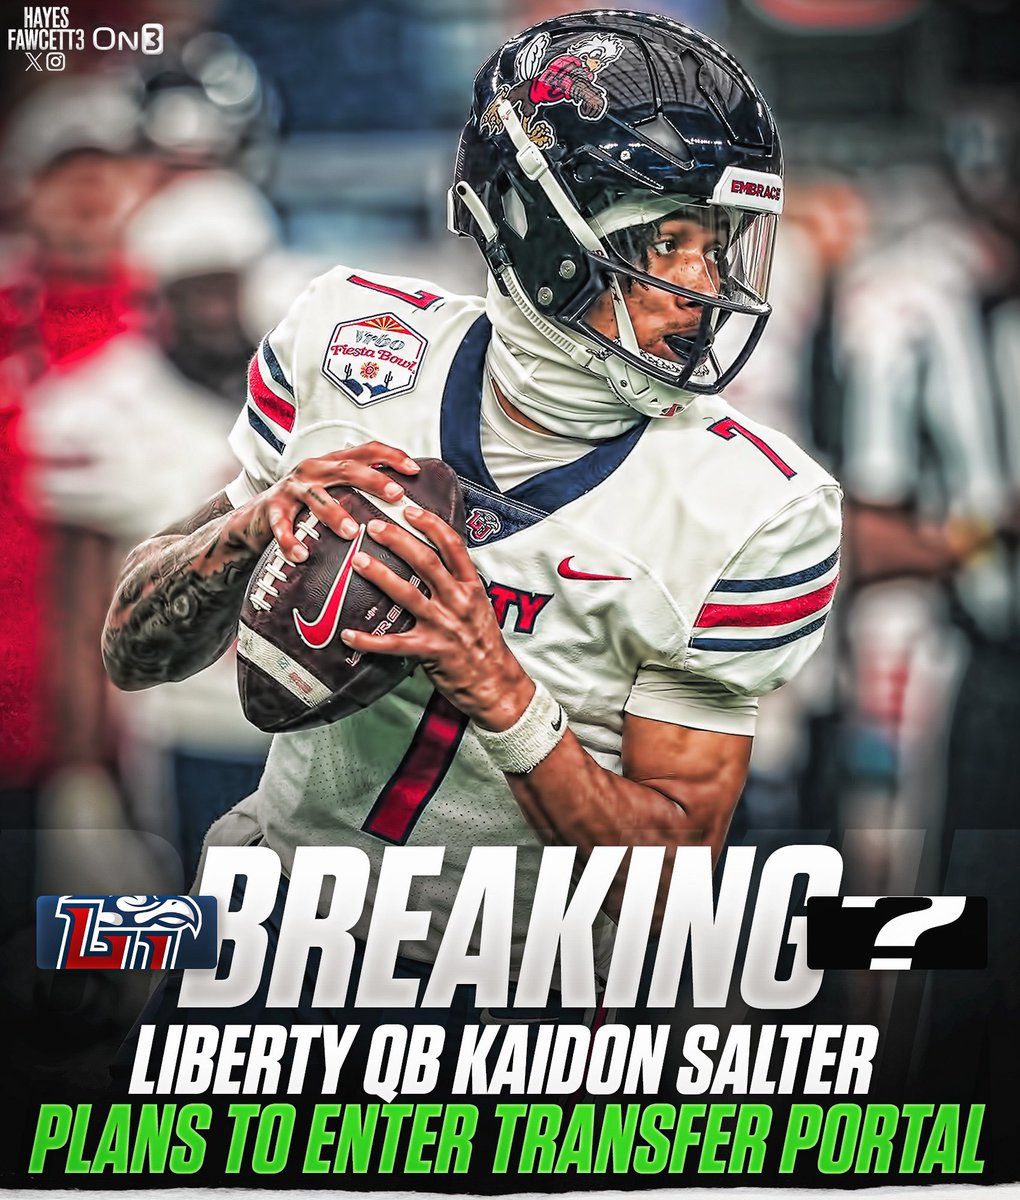 BREAKING: Liberty QB Kaidon Salter plans to enter the Transfer Portal, he tells @on3sports The 6’1 195 QB threw for 2,876 yards and 32 TDs. Added 1,089 yards rushing & 12 TDs on the ground. Led Liberty to a 13-1 Record & will have 2 years of eligibility remaining…